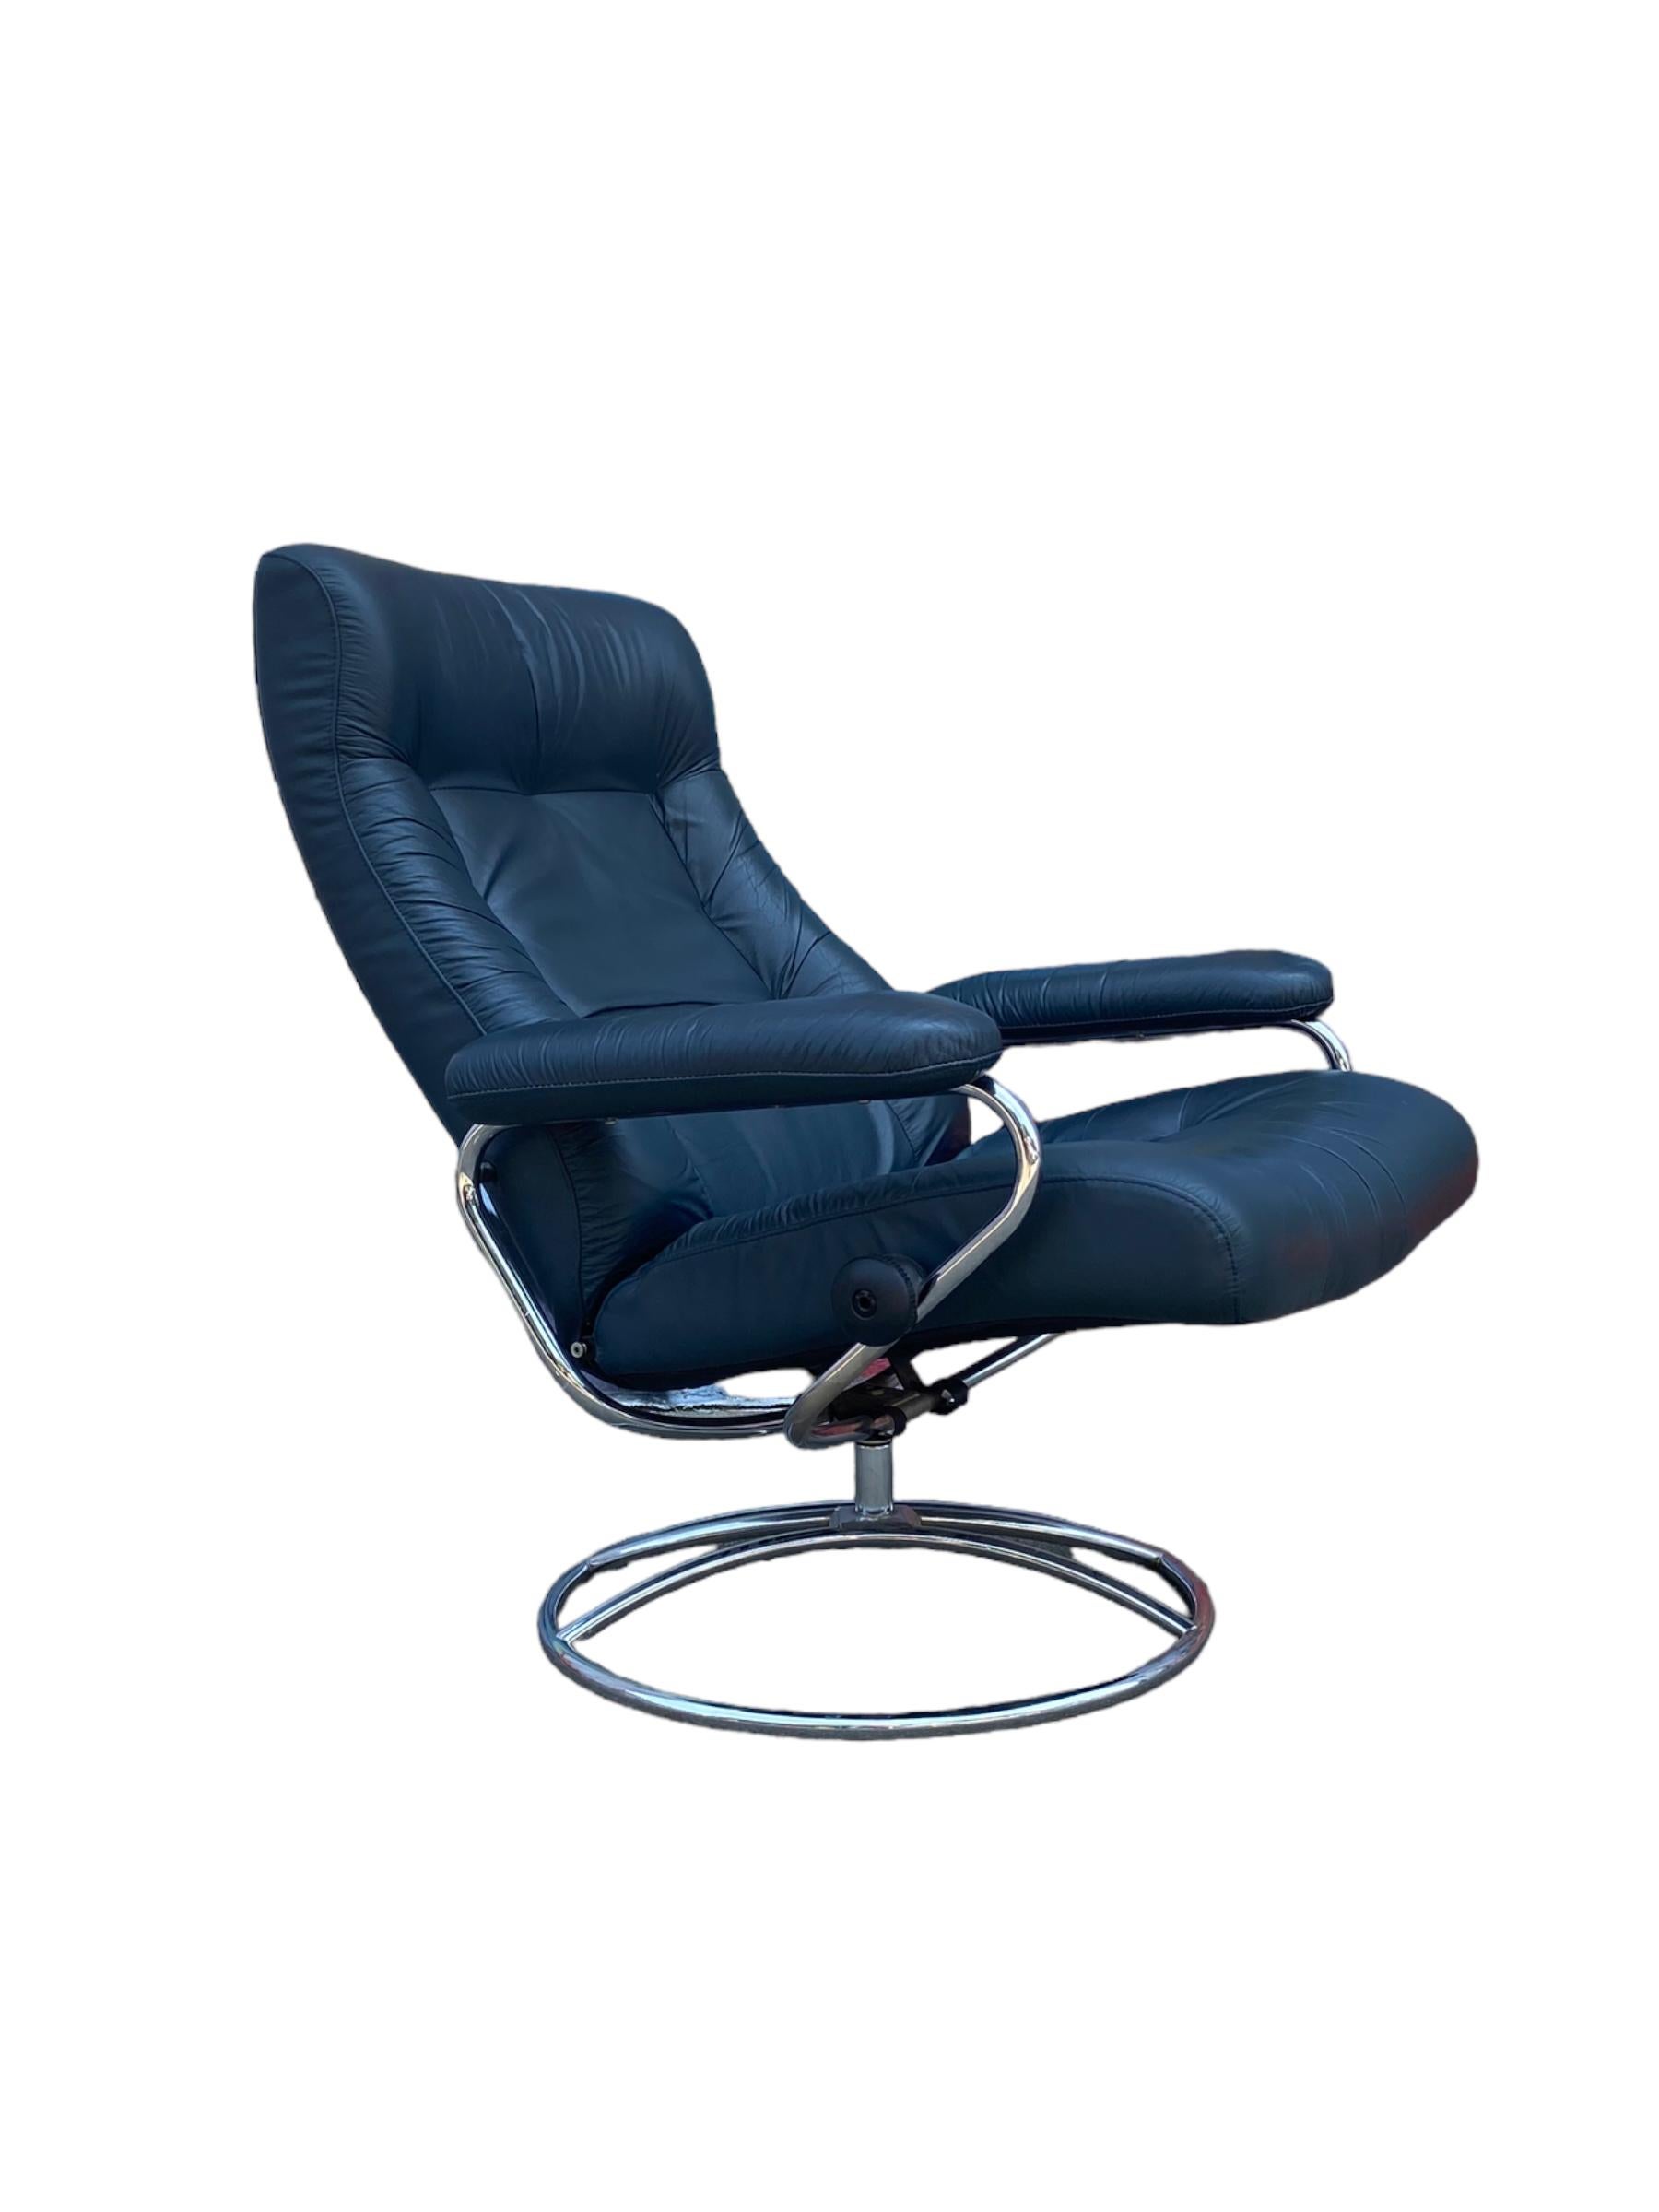 Mid-Century Modern Ekornes Stressless Reclining Lounge Chair and Ottoman in Navy Blue